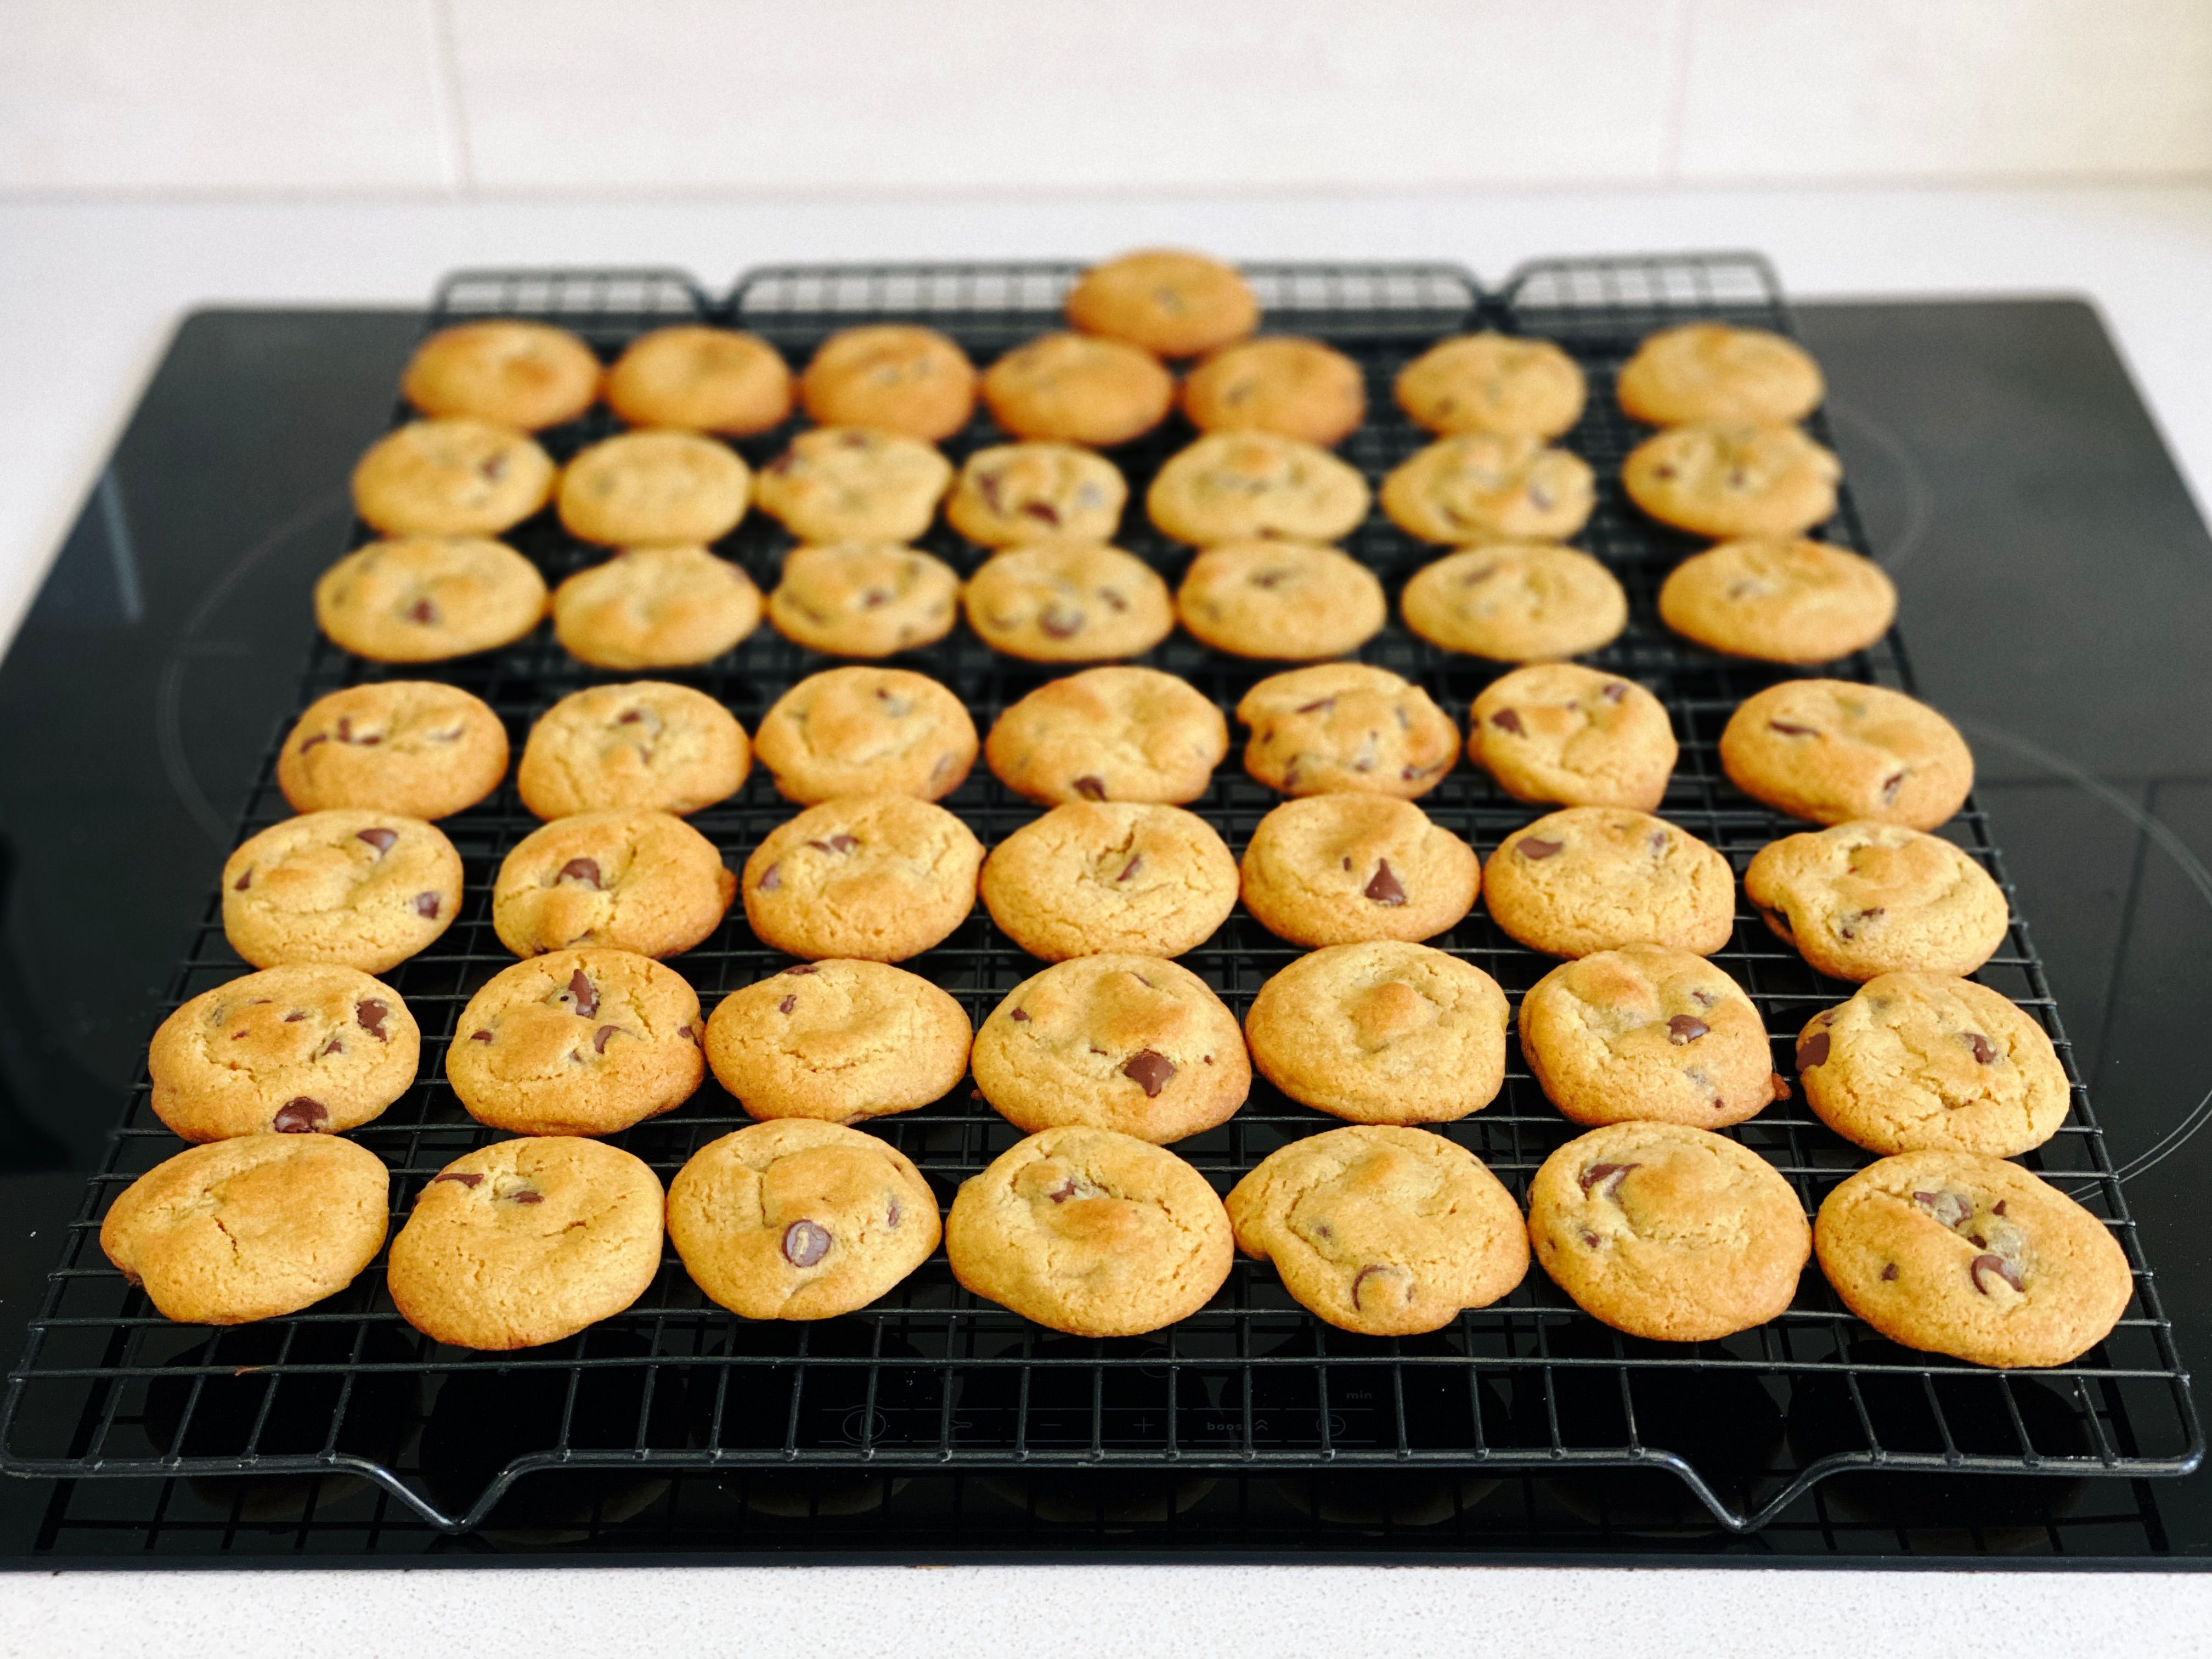 A photo of 50 (yes, five zero) small chocolate chip cookies sitting on a cooling rack.